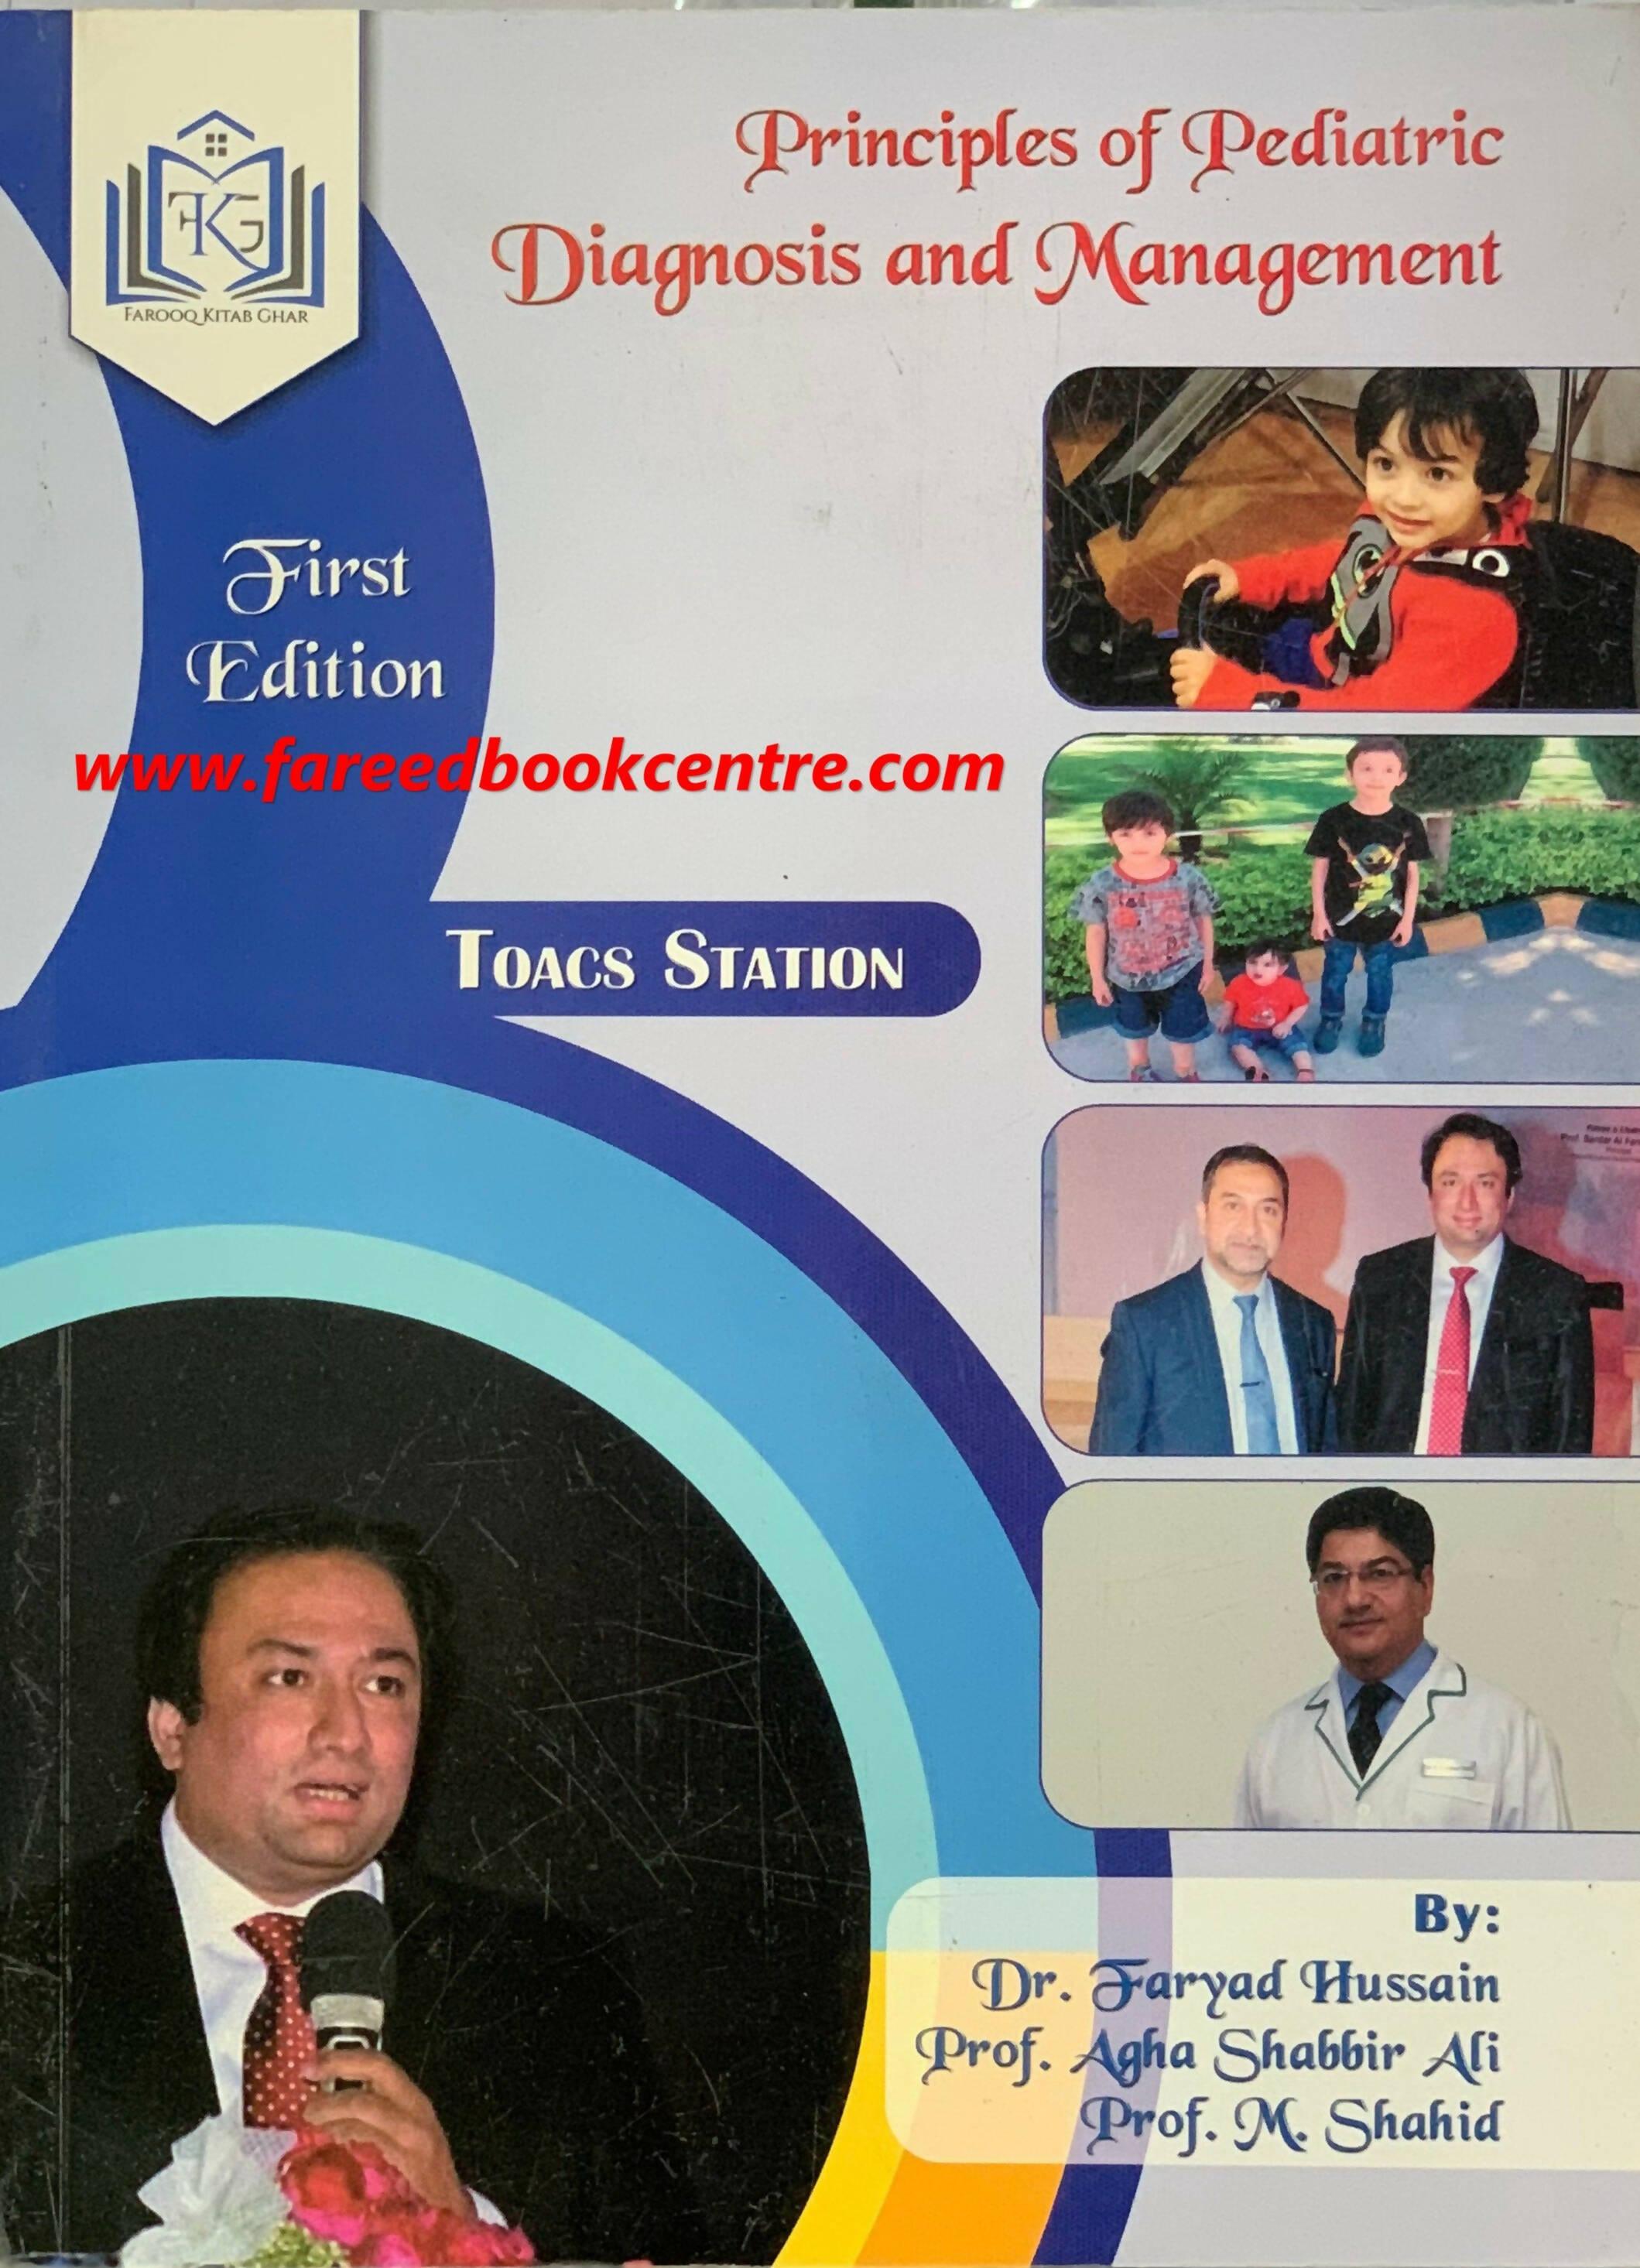 Principles Of Pediatric Diagnosis And Management 1st Edition By Dr Faryad Hussain - ValueBox